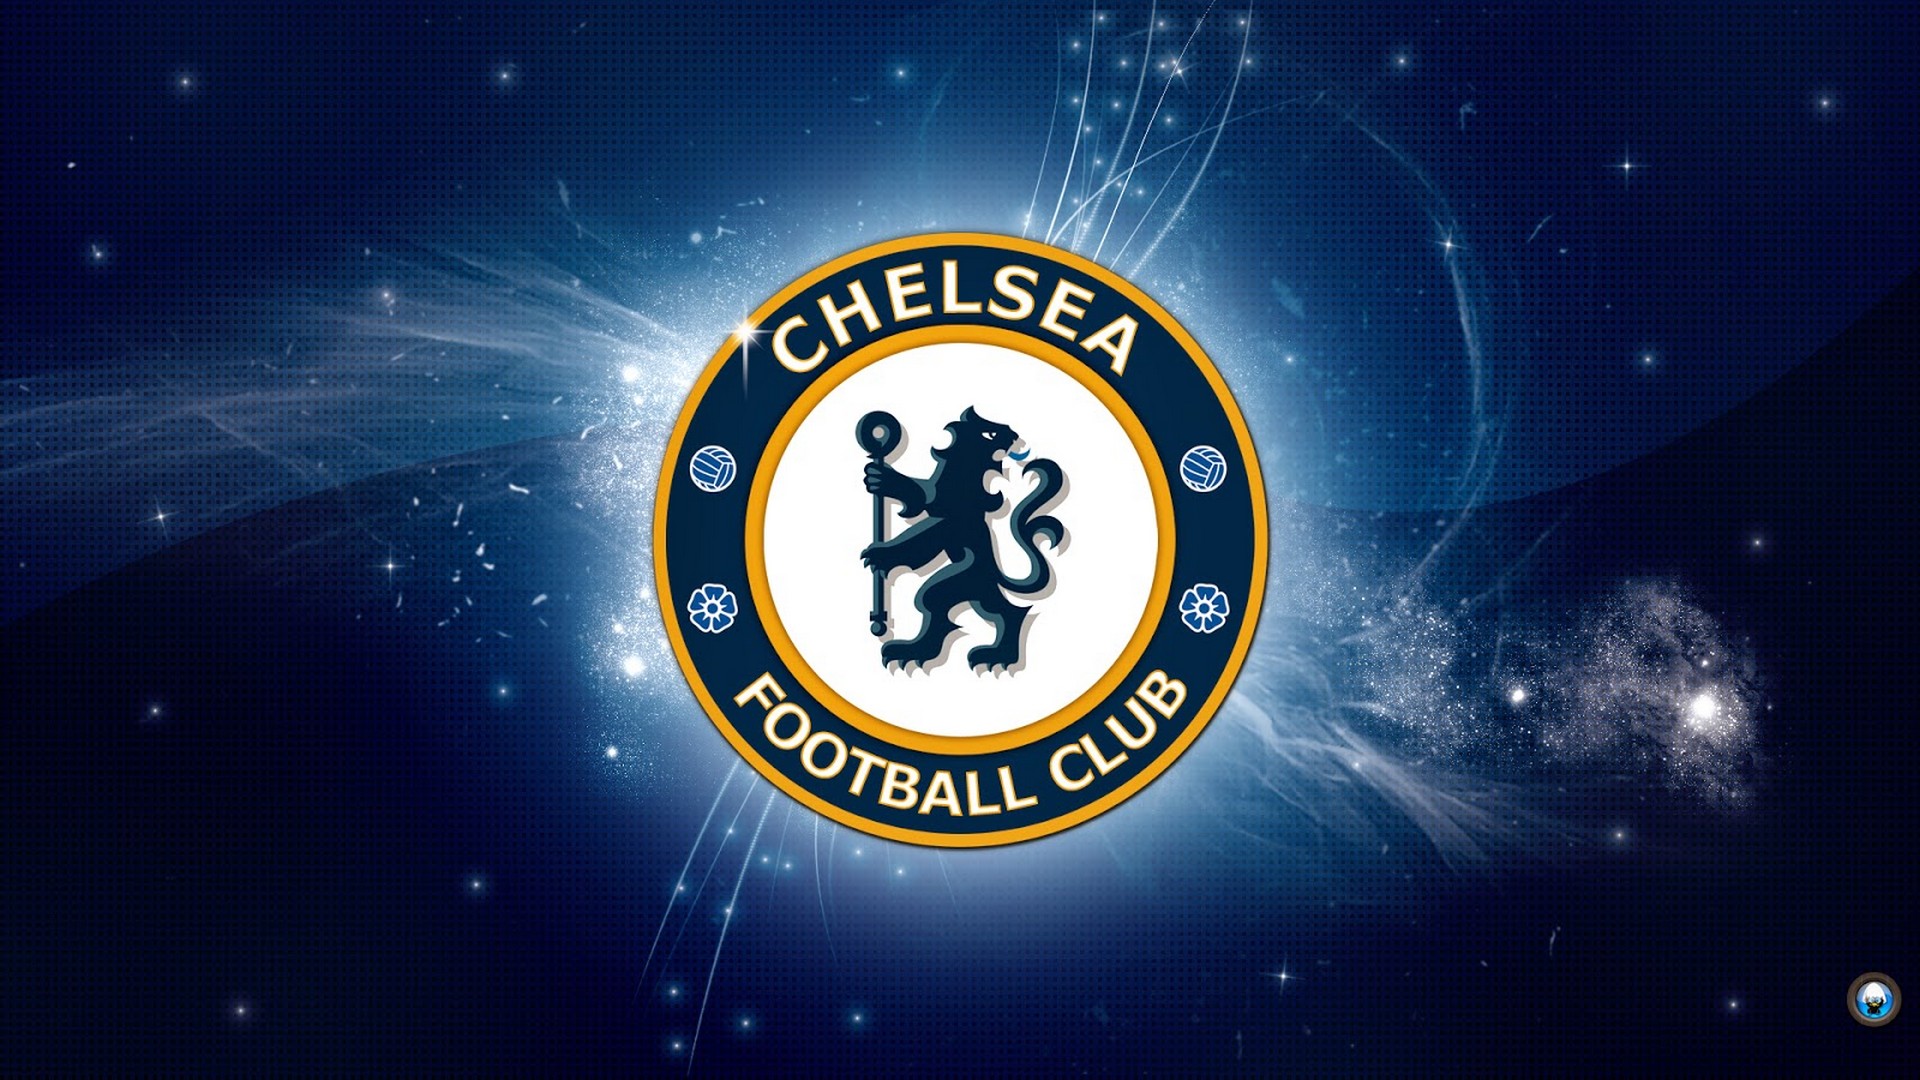 Wallpaper Desktop Chelsea Football HD With Resolution 1920X1080 pixel. You can make this wallpaper for your Mac or Windows Desktop Background, iPhone, Android or Tablet and another Smartphone device for free